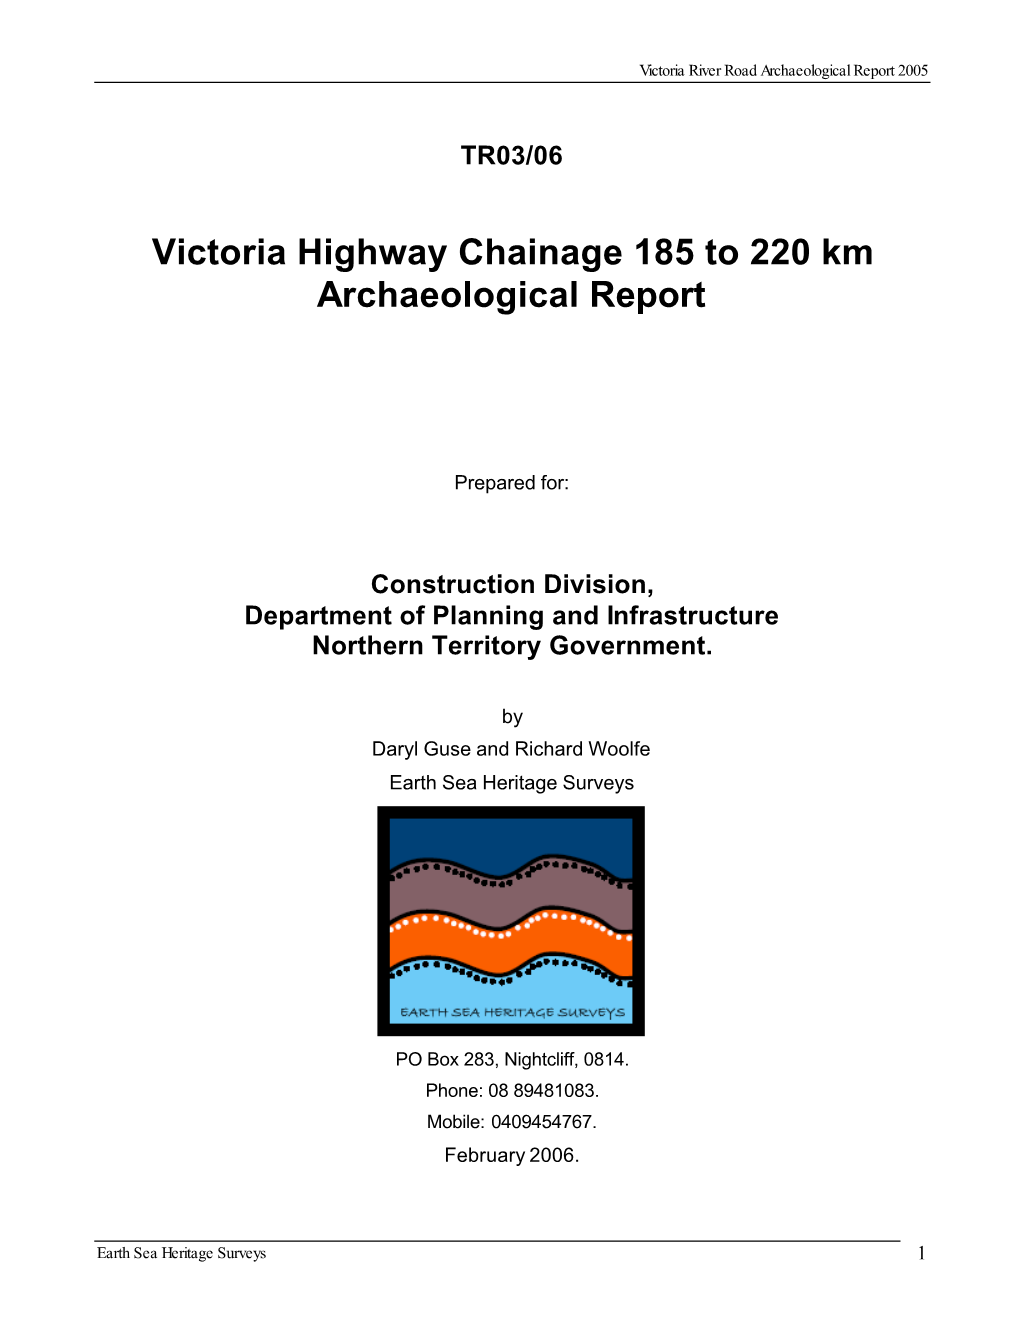 2. Victoria Highway Chainage 185 to 220 Km Archaeological …